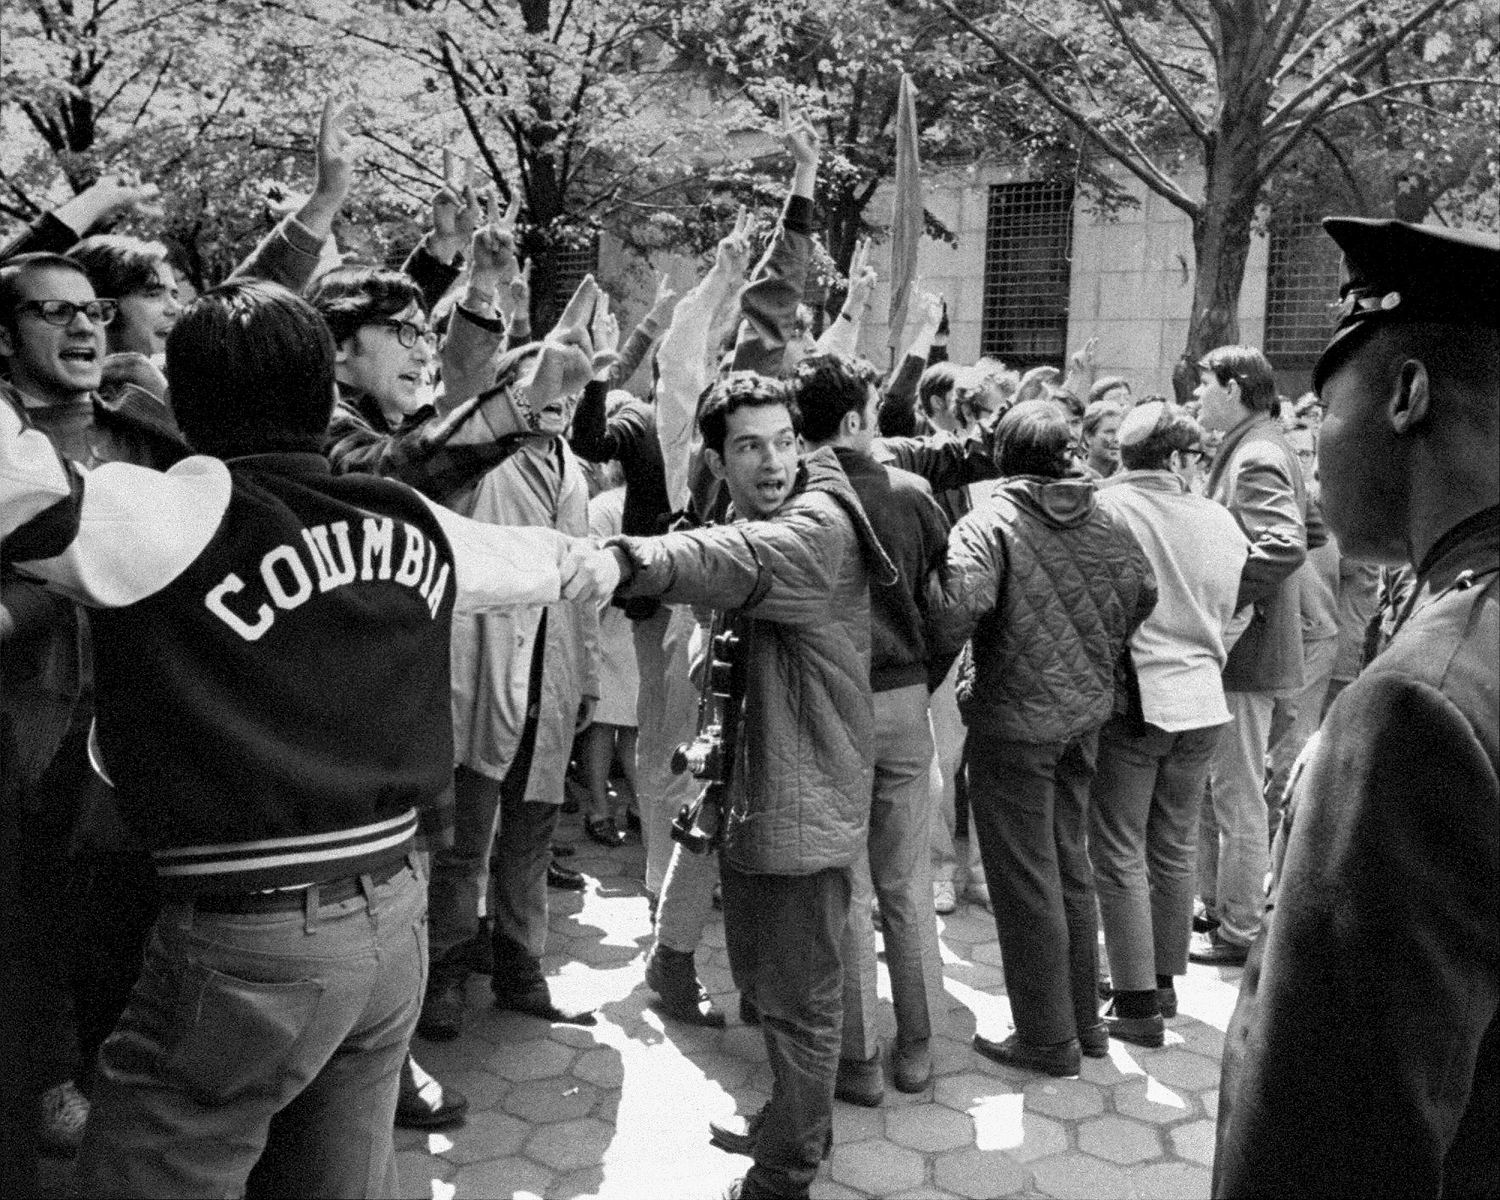 Columbia unrest echoes chaotic campus protest movement of 1968 